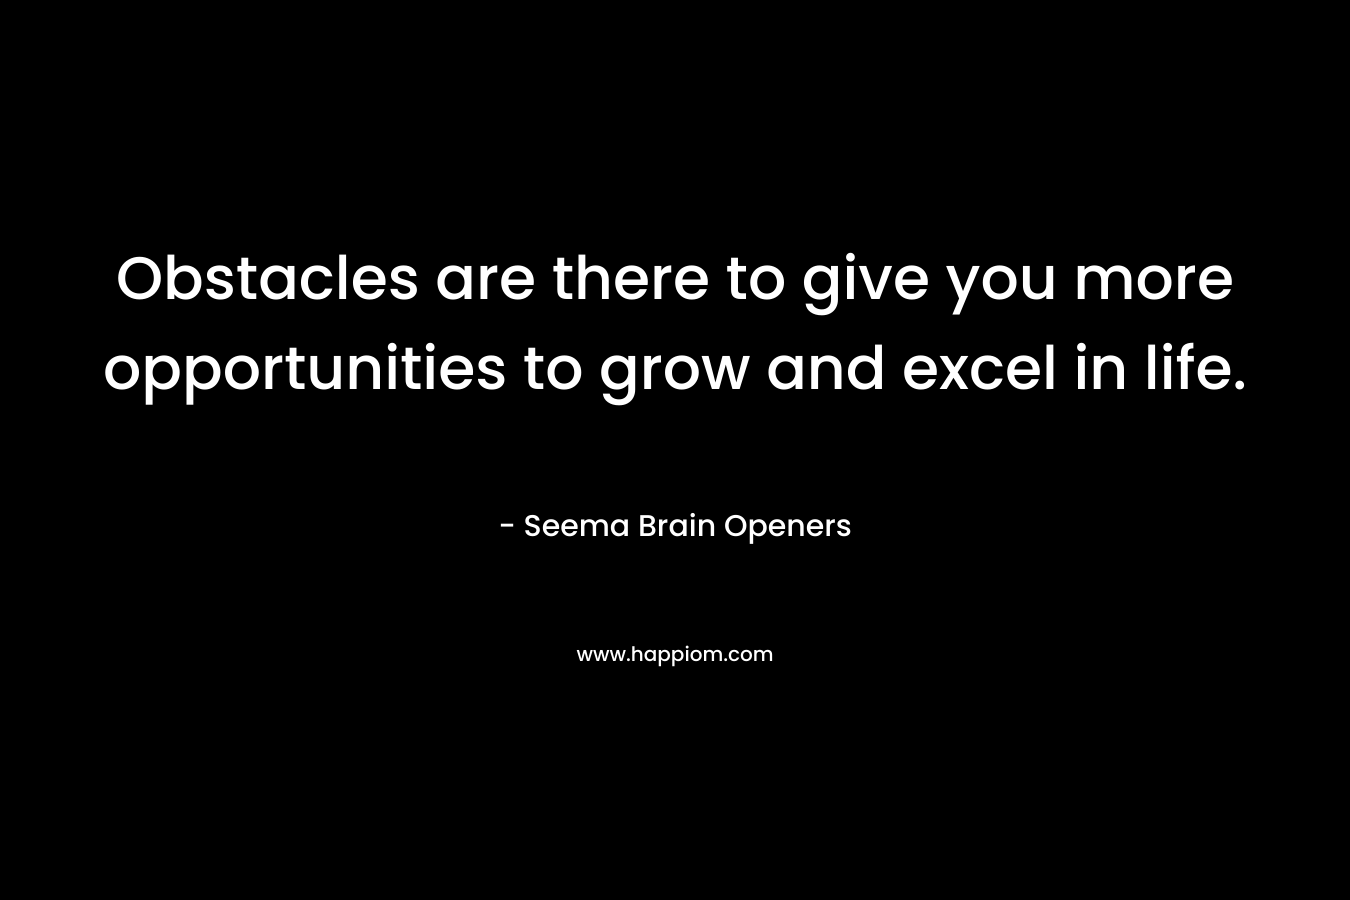 Obstacles are there to give you more opportunities to grow and excel in life.